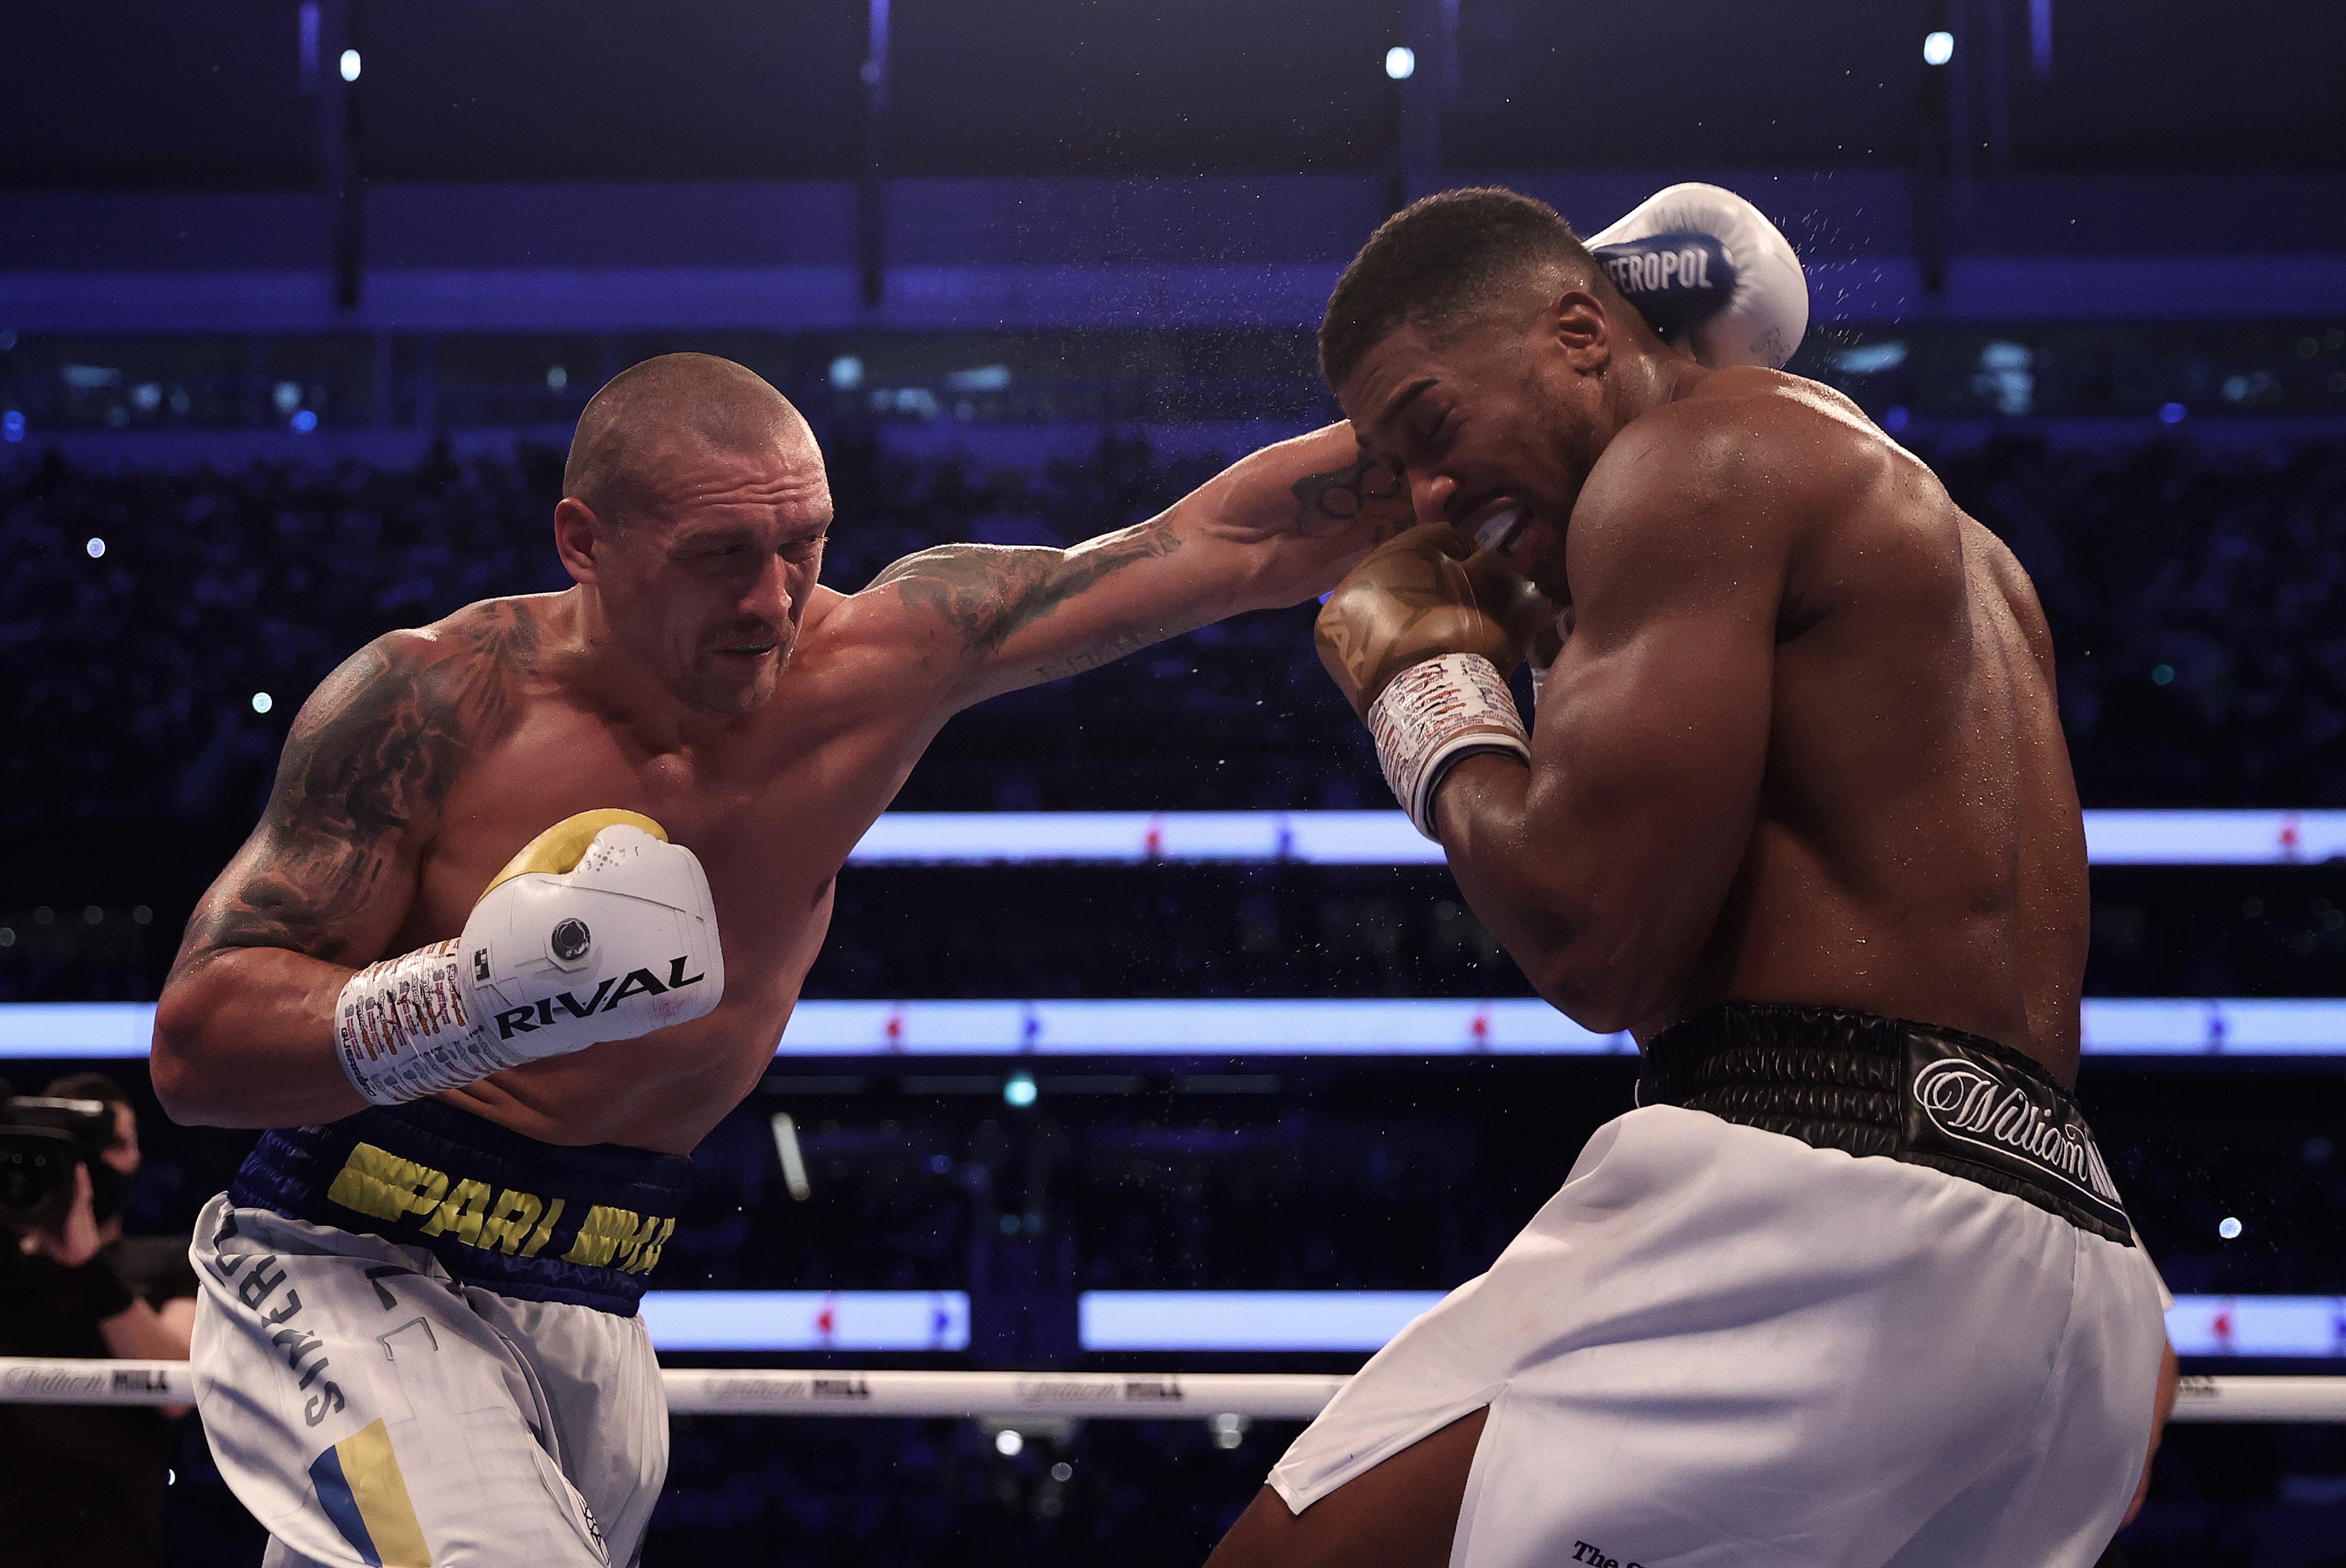 Oleksandr Usyk nearly stopped Joshua in the last round of their first fight